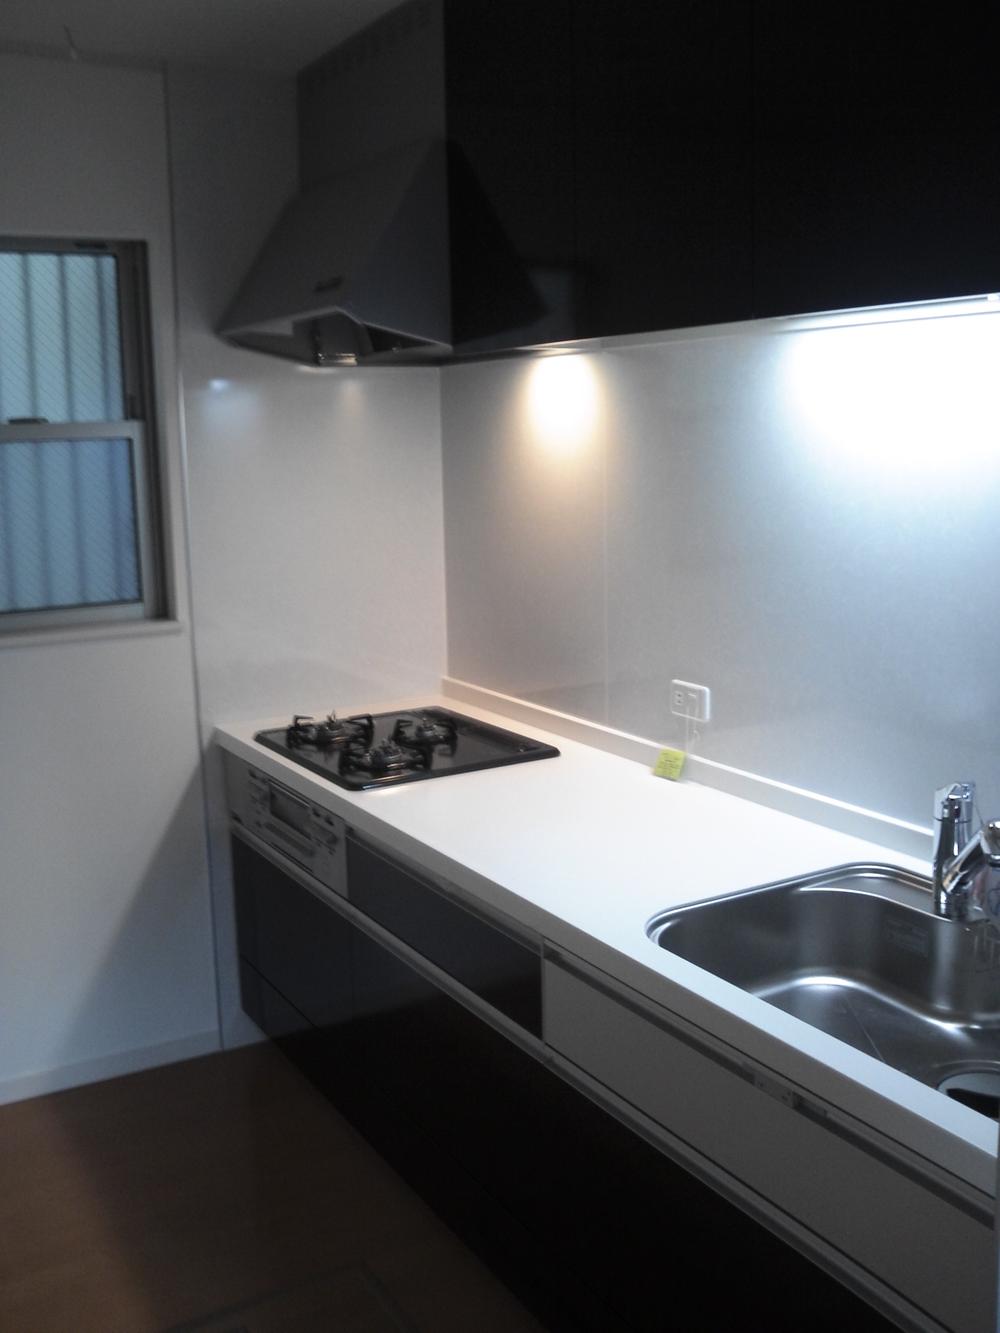 Kitchen. We specification is calm color kitchen